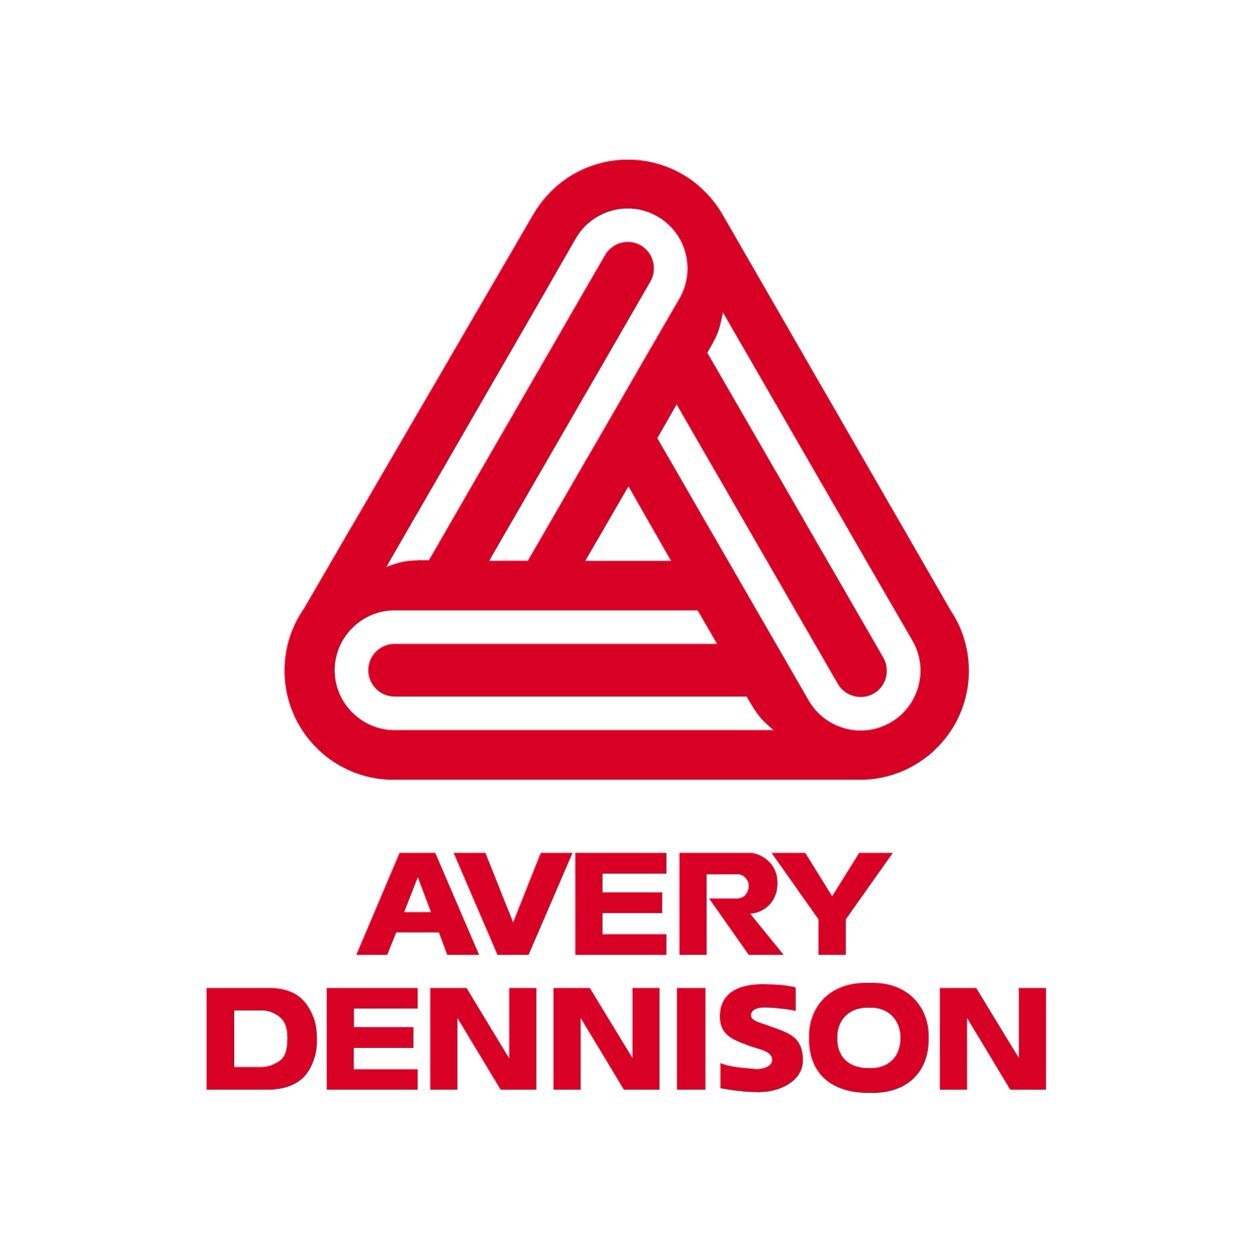 Avery Dennison Acrylic Foam Bond (AFB™) tape is used for applications that require a high performance bond.